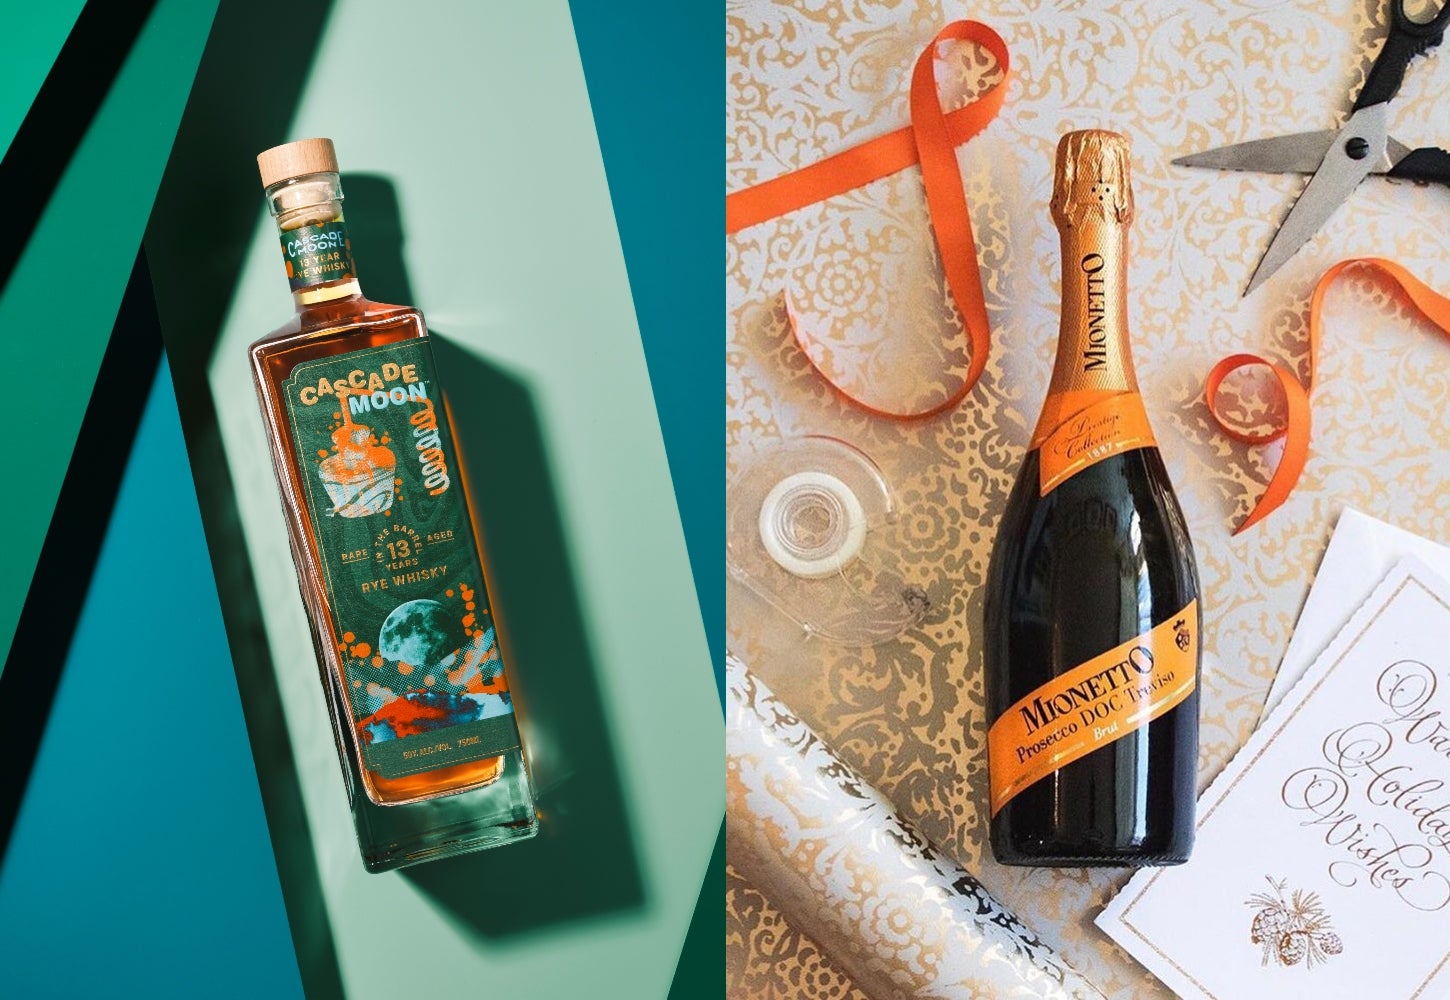 Spirits, Wine, Beer (And A Sake!) That Are Perfect Last-Minute Stocking Stuffers